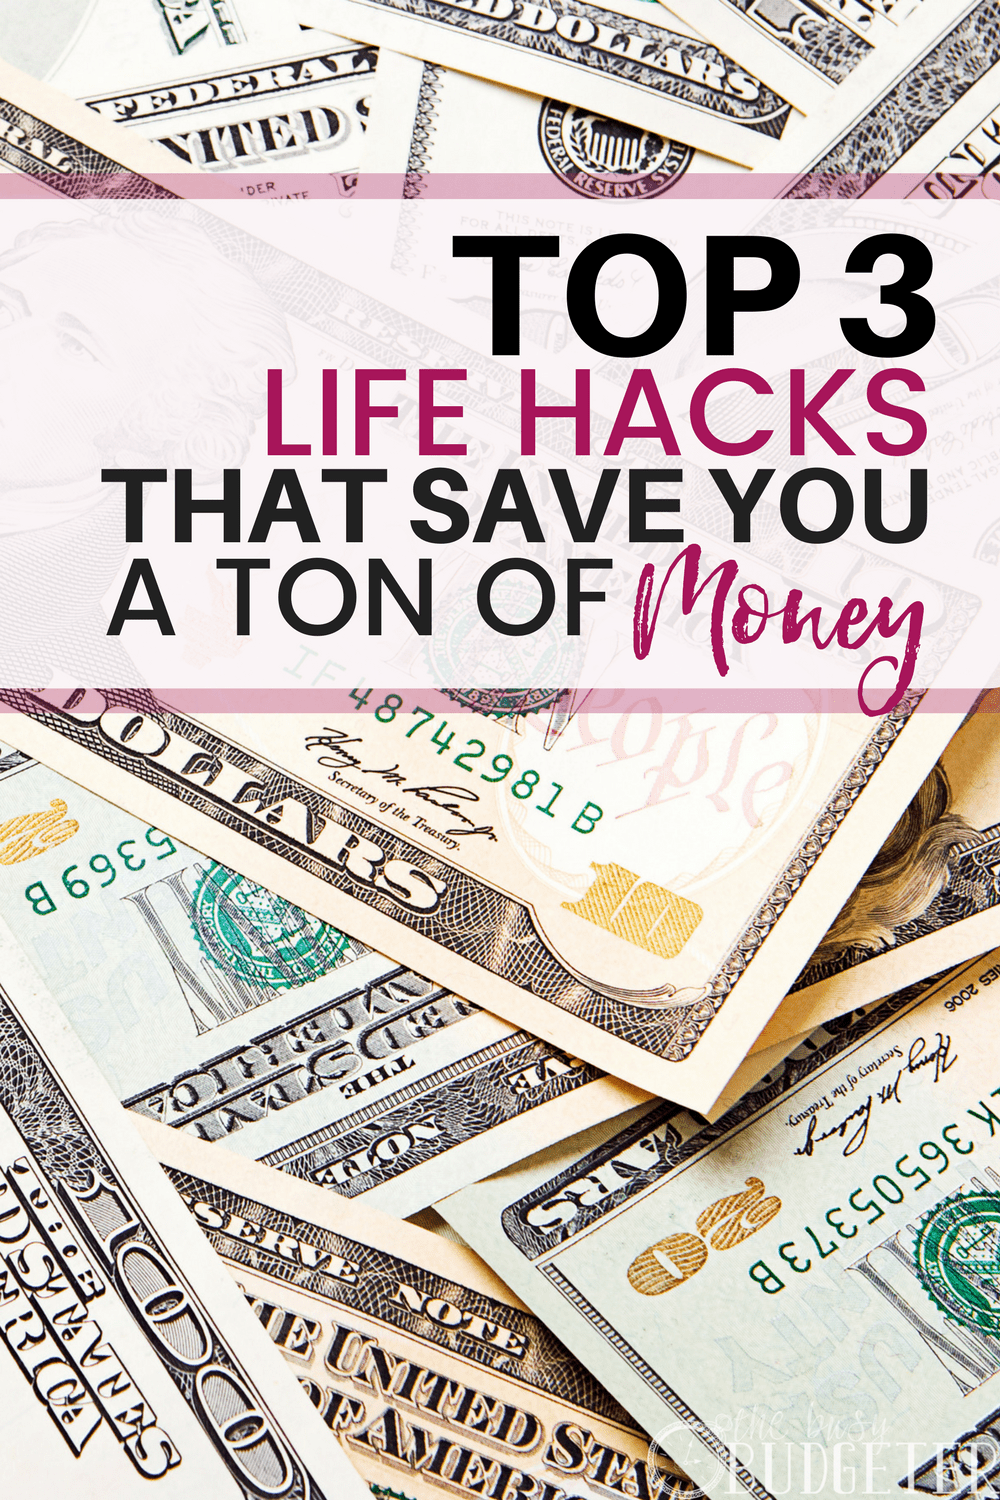 Every girl should know these free money saving life hacks. We saved over $200/month implementing these!